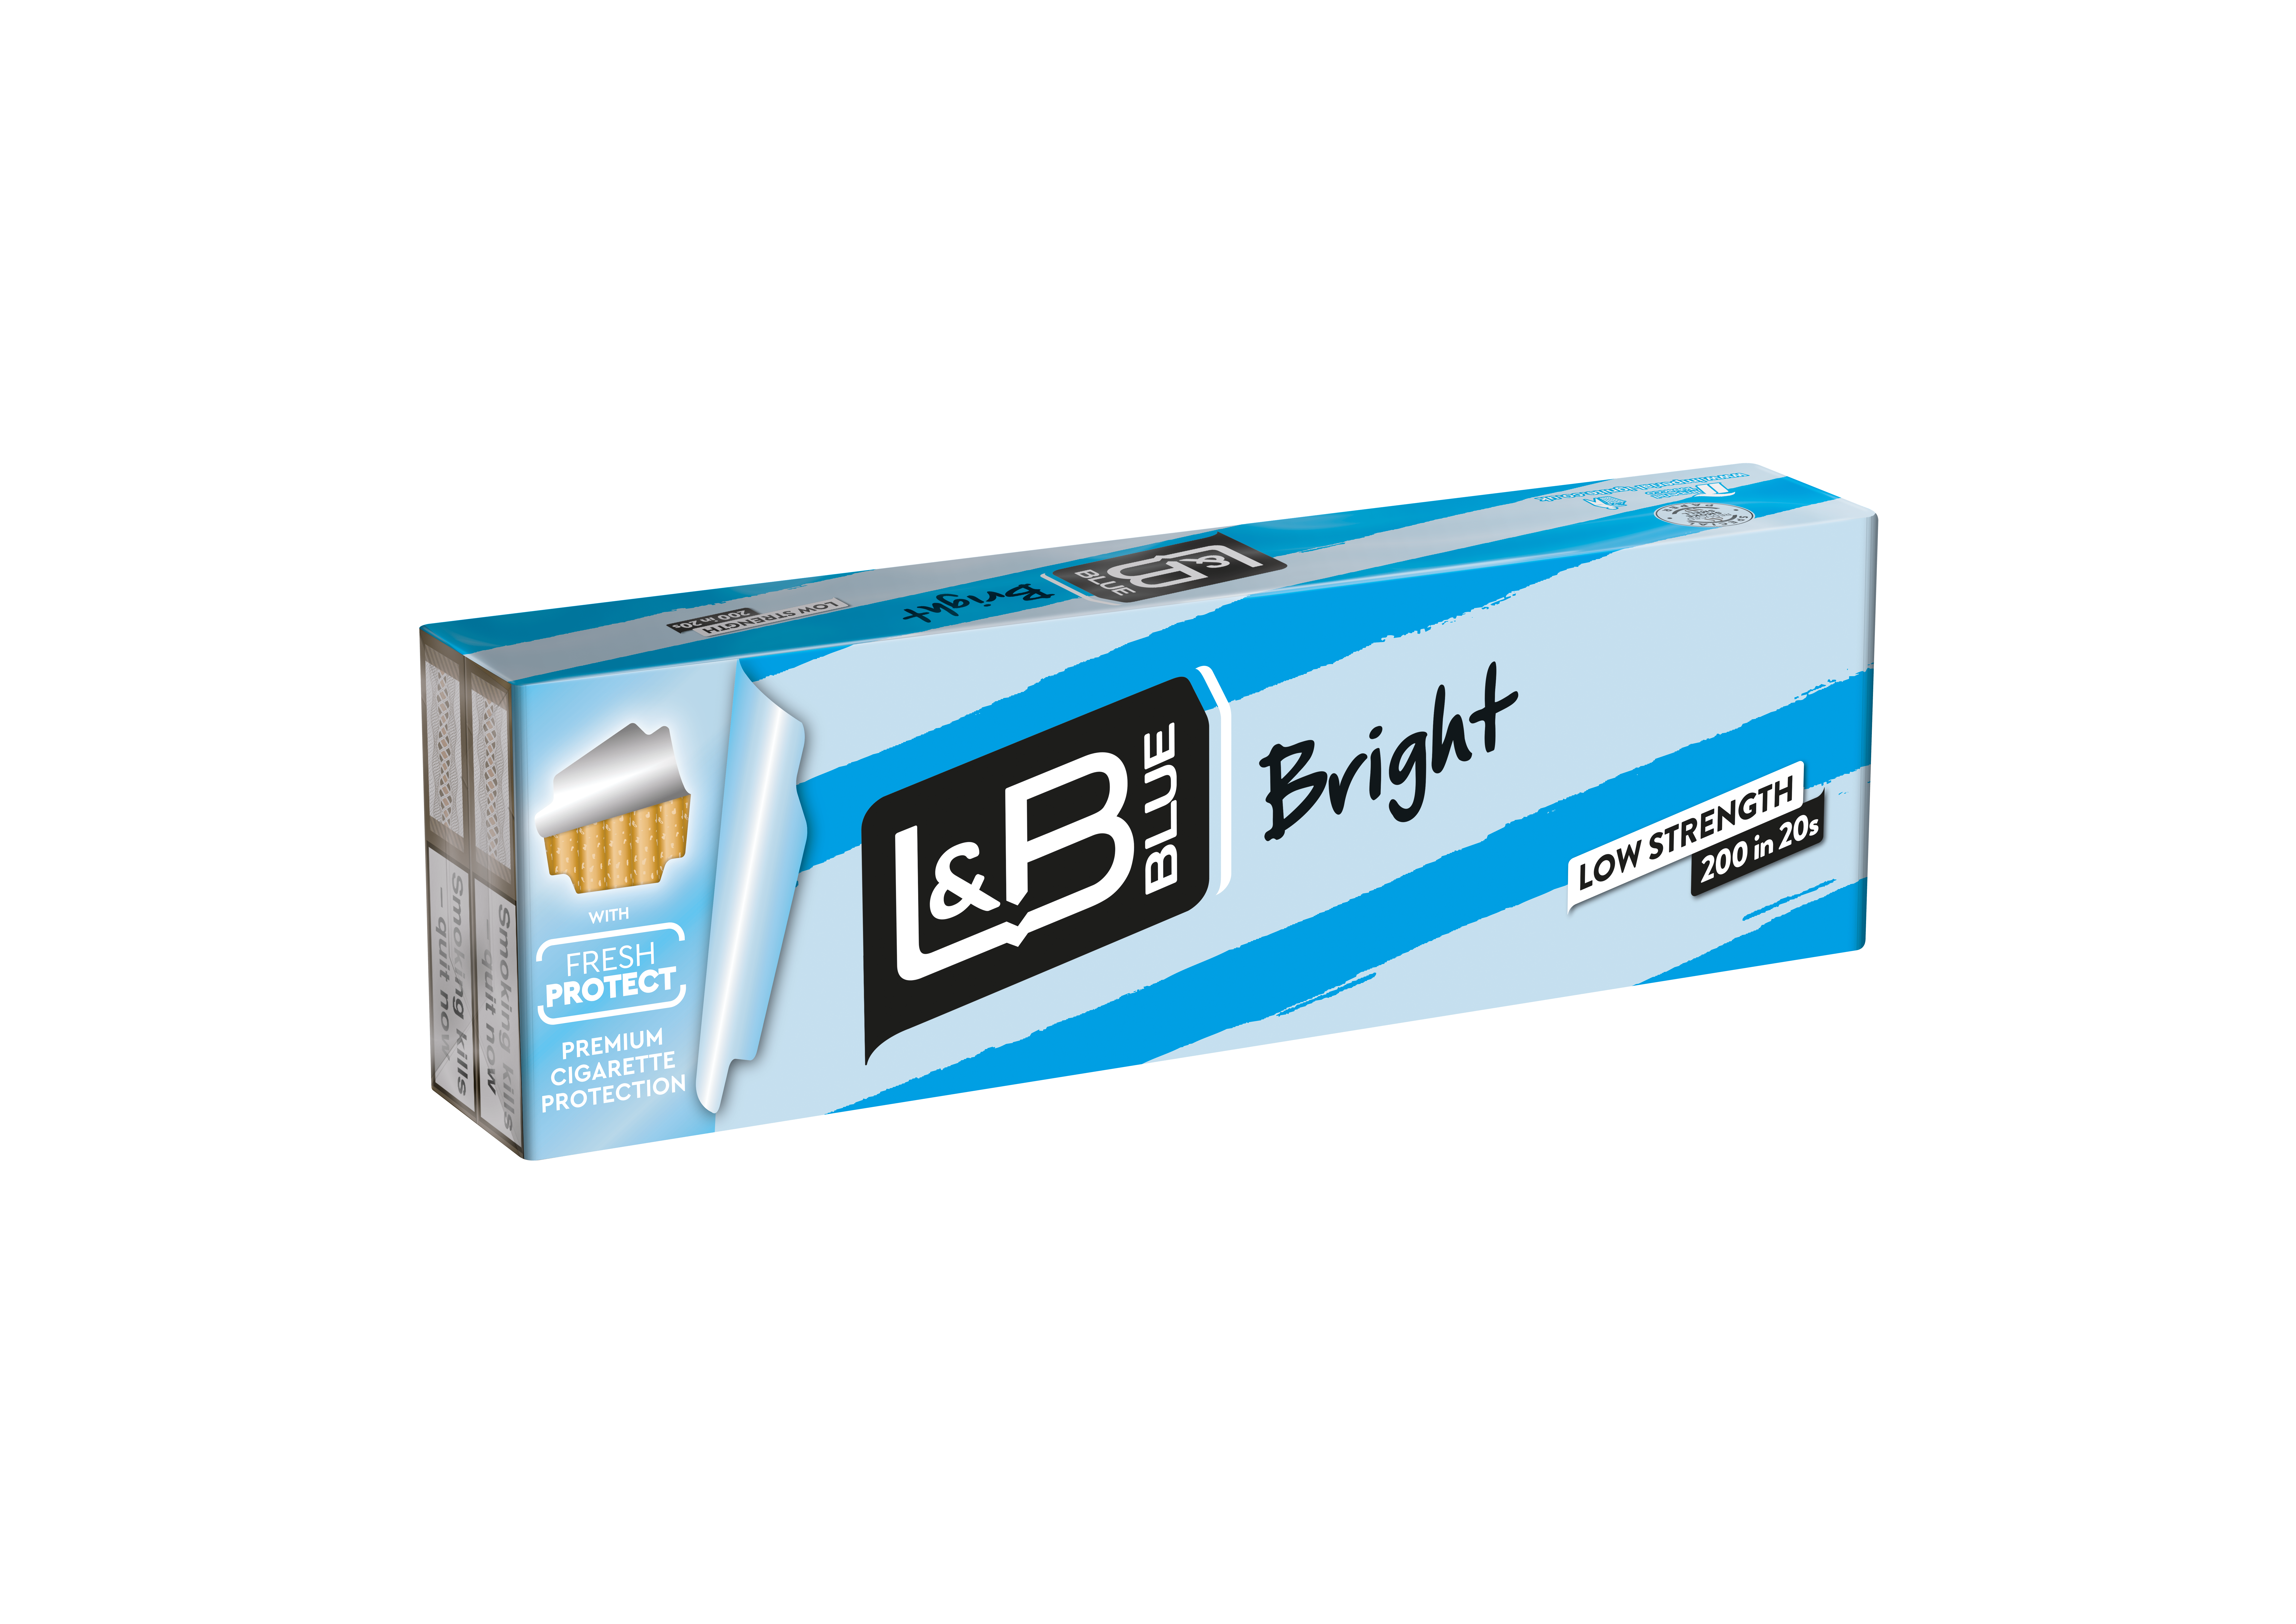 Imperial Tobacco upgrades and expands L&B Blue Brand family